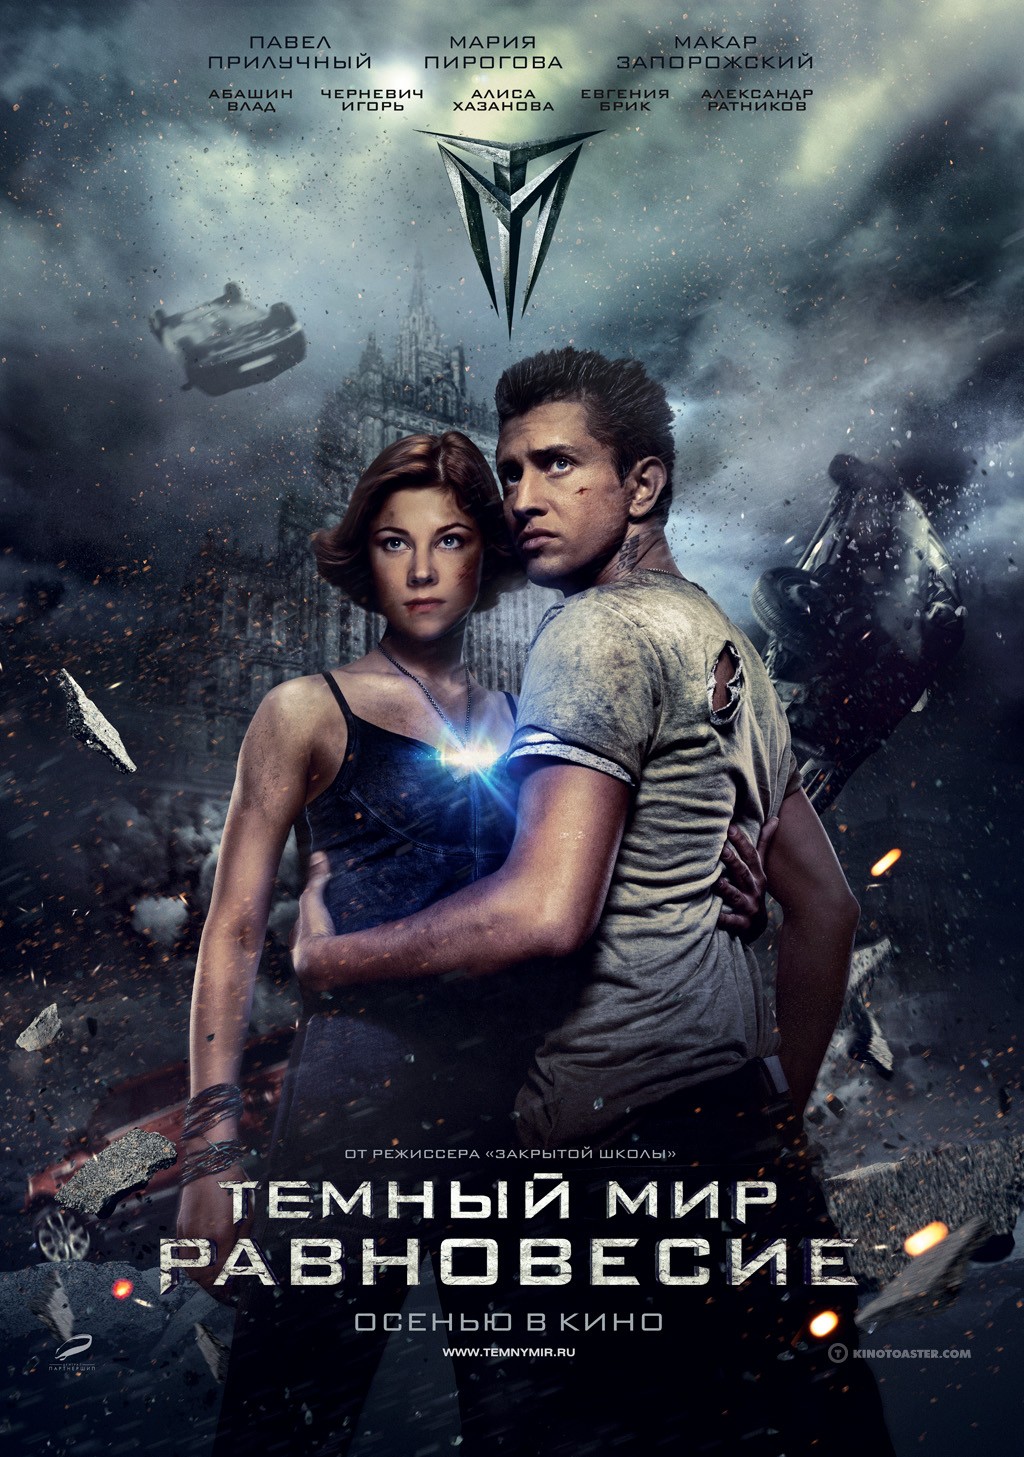 Extra Large Movie Poster Image for Temnyy mir 2 (#3 of 6)